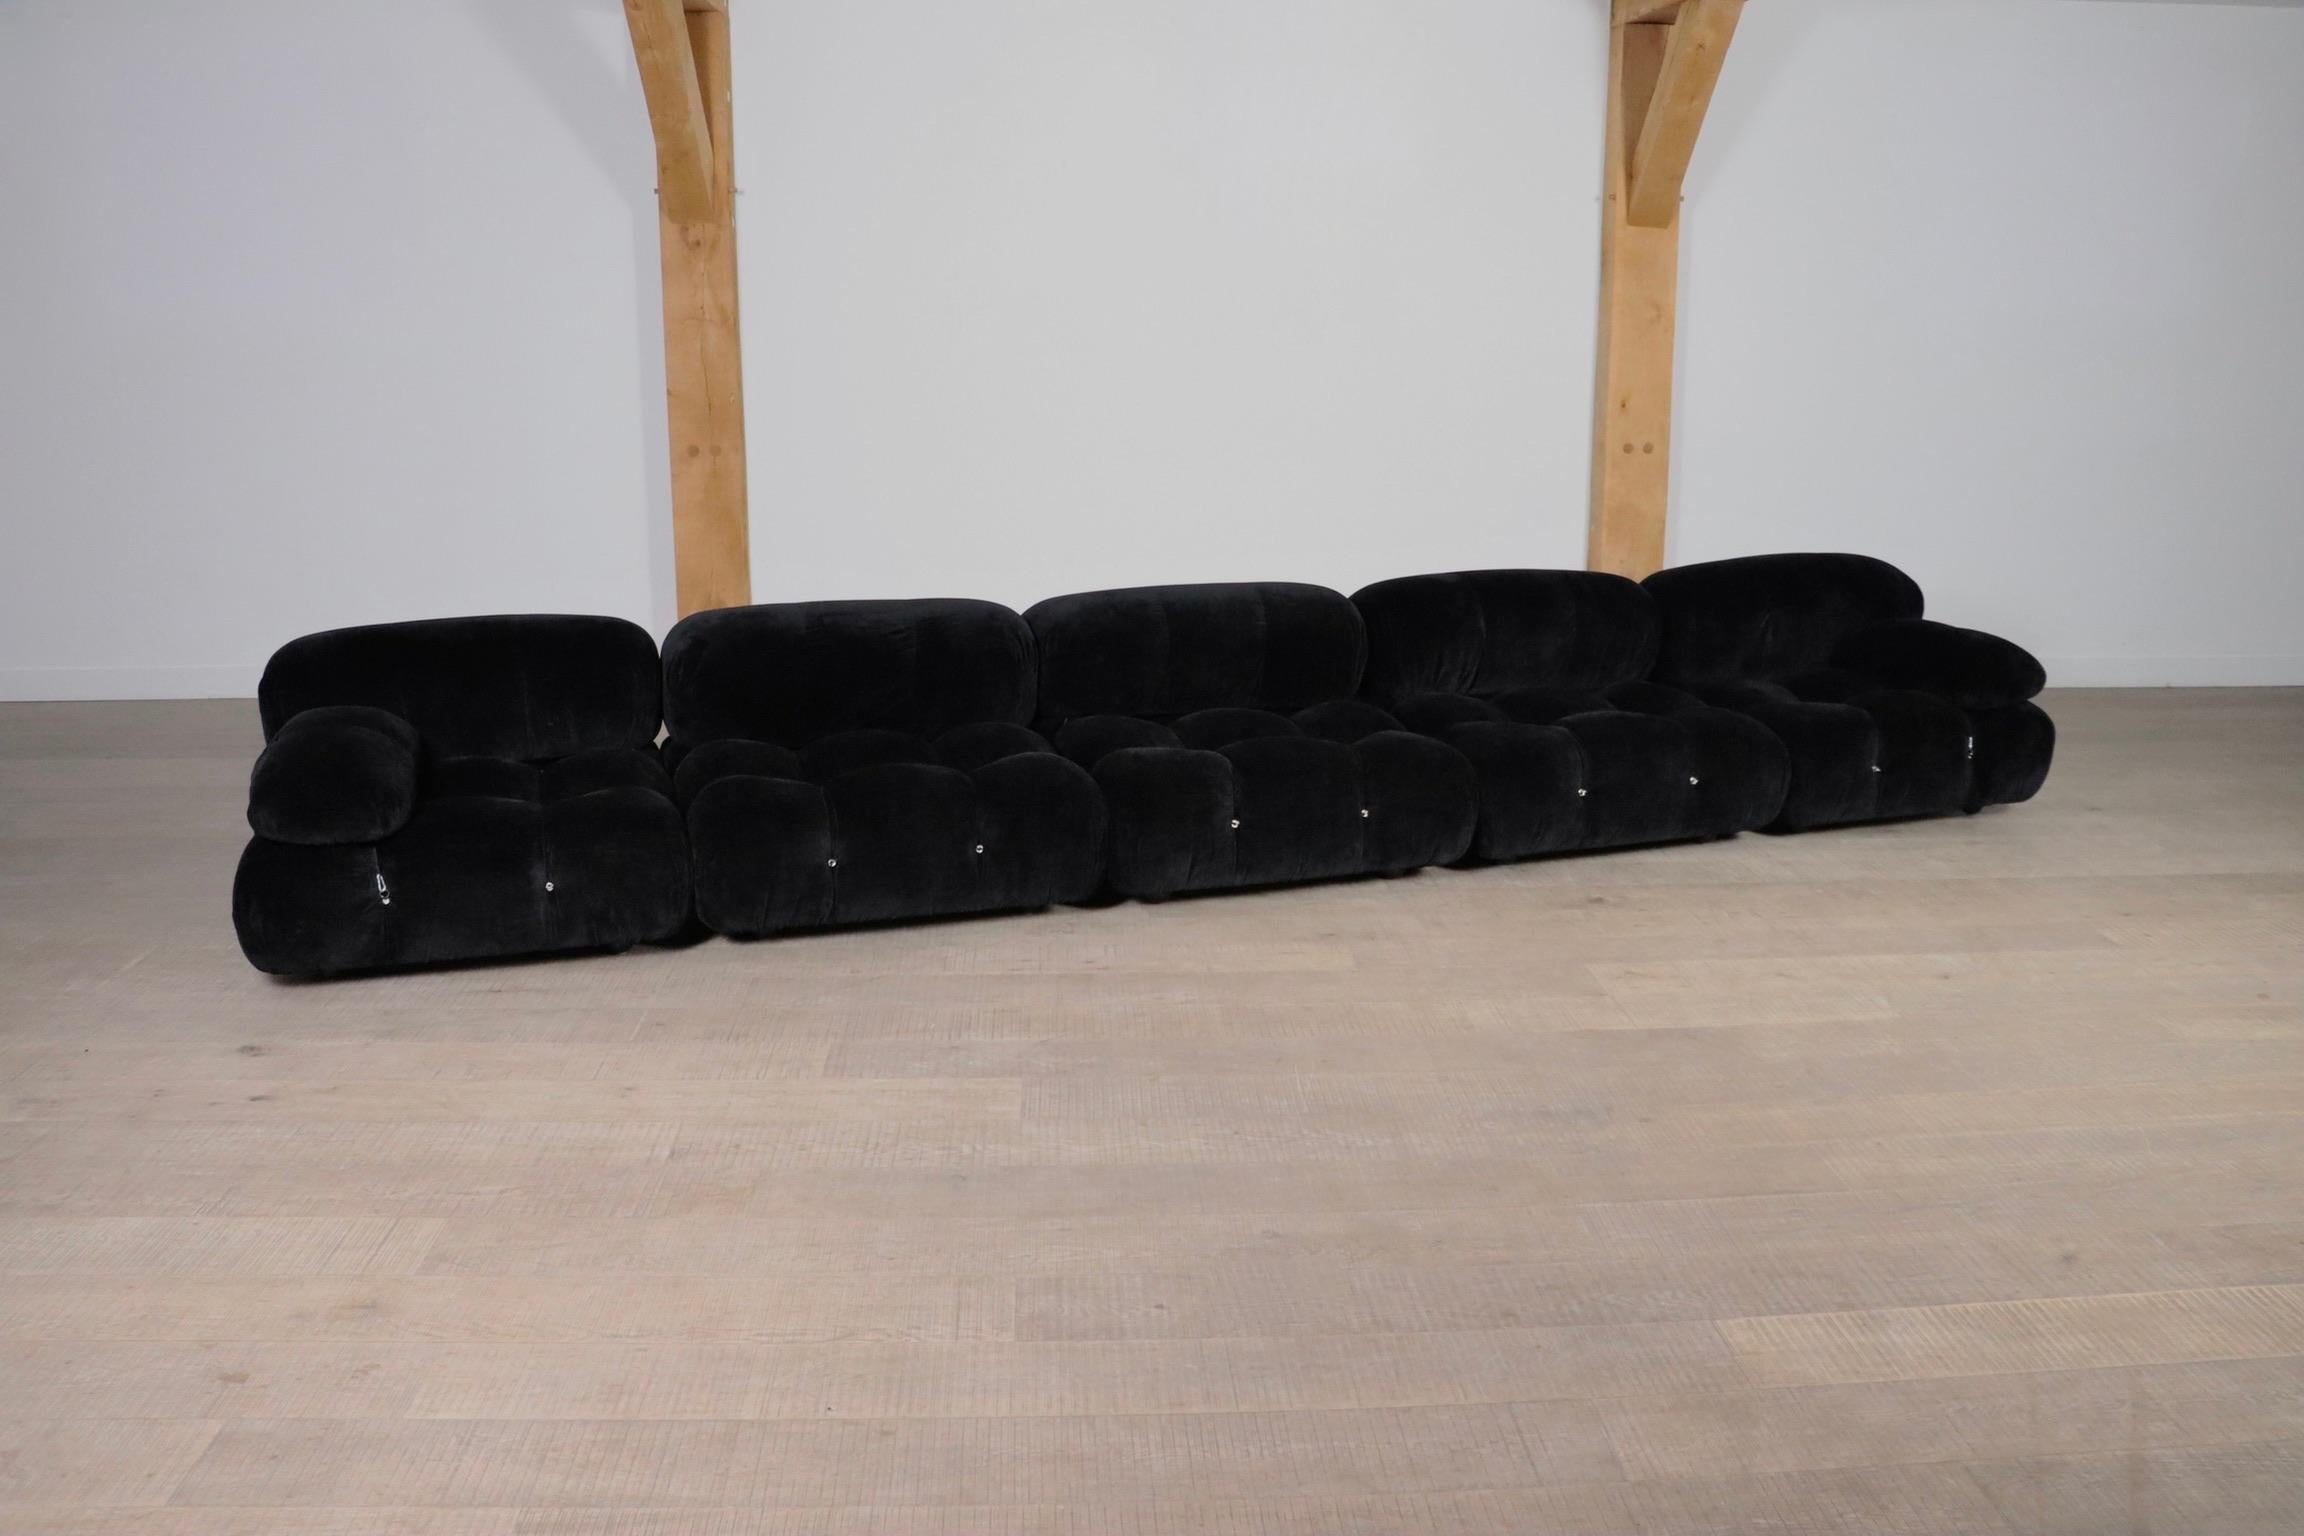 Mario Bellini’s, ‘Camaleonda’ sofa, in black velvet upholstery by B&B Italia, Italy, 1972. This nice set consists of five large elements, of which two with armrests, all in completely original and excellent condition! This iconic design is known for